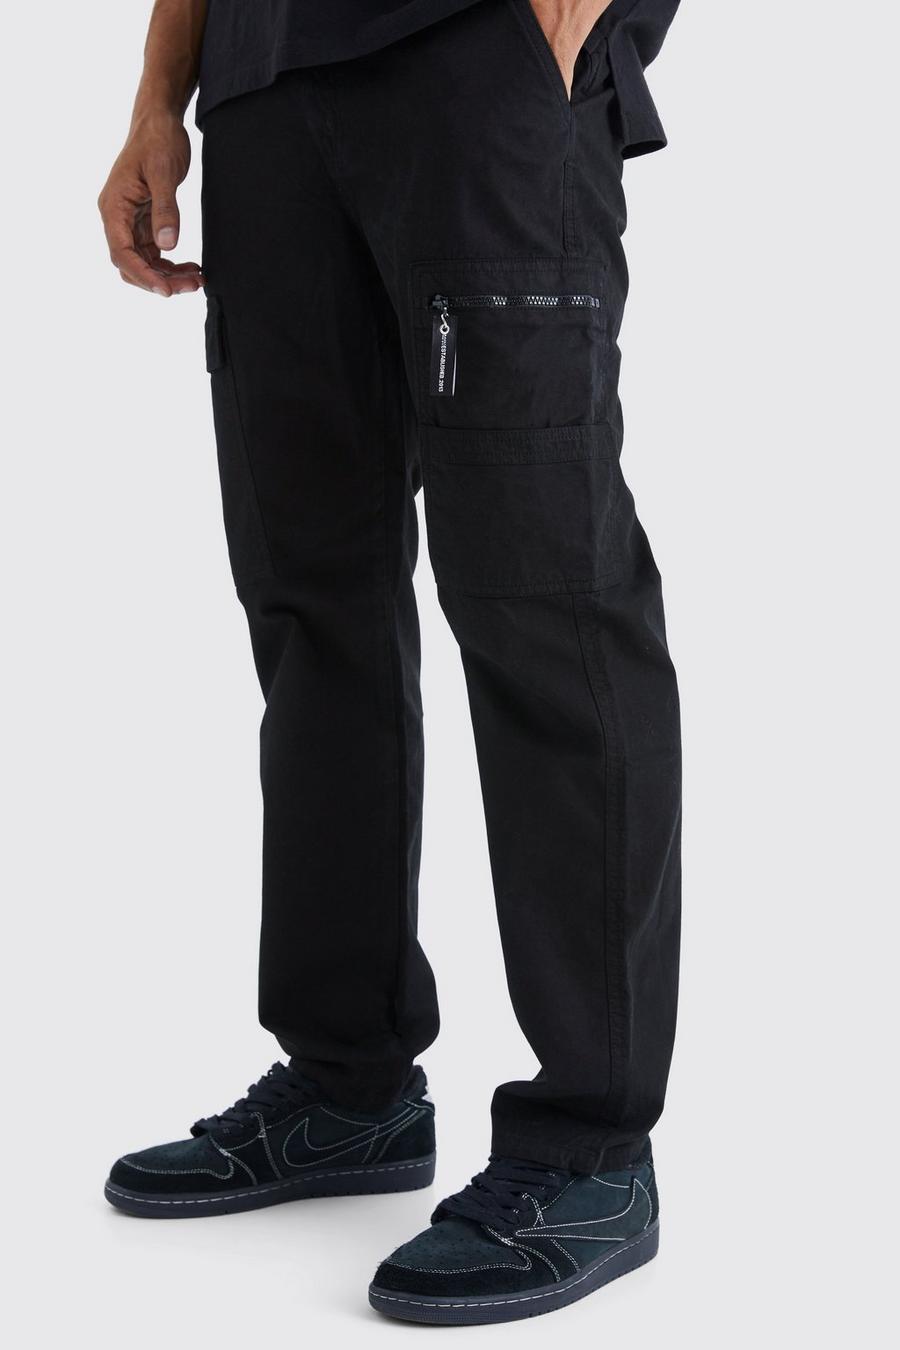 Black Straight Leg Cargo Pants With Branded Zip Puller